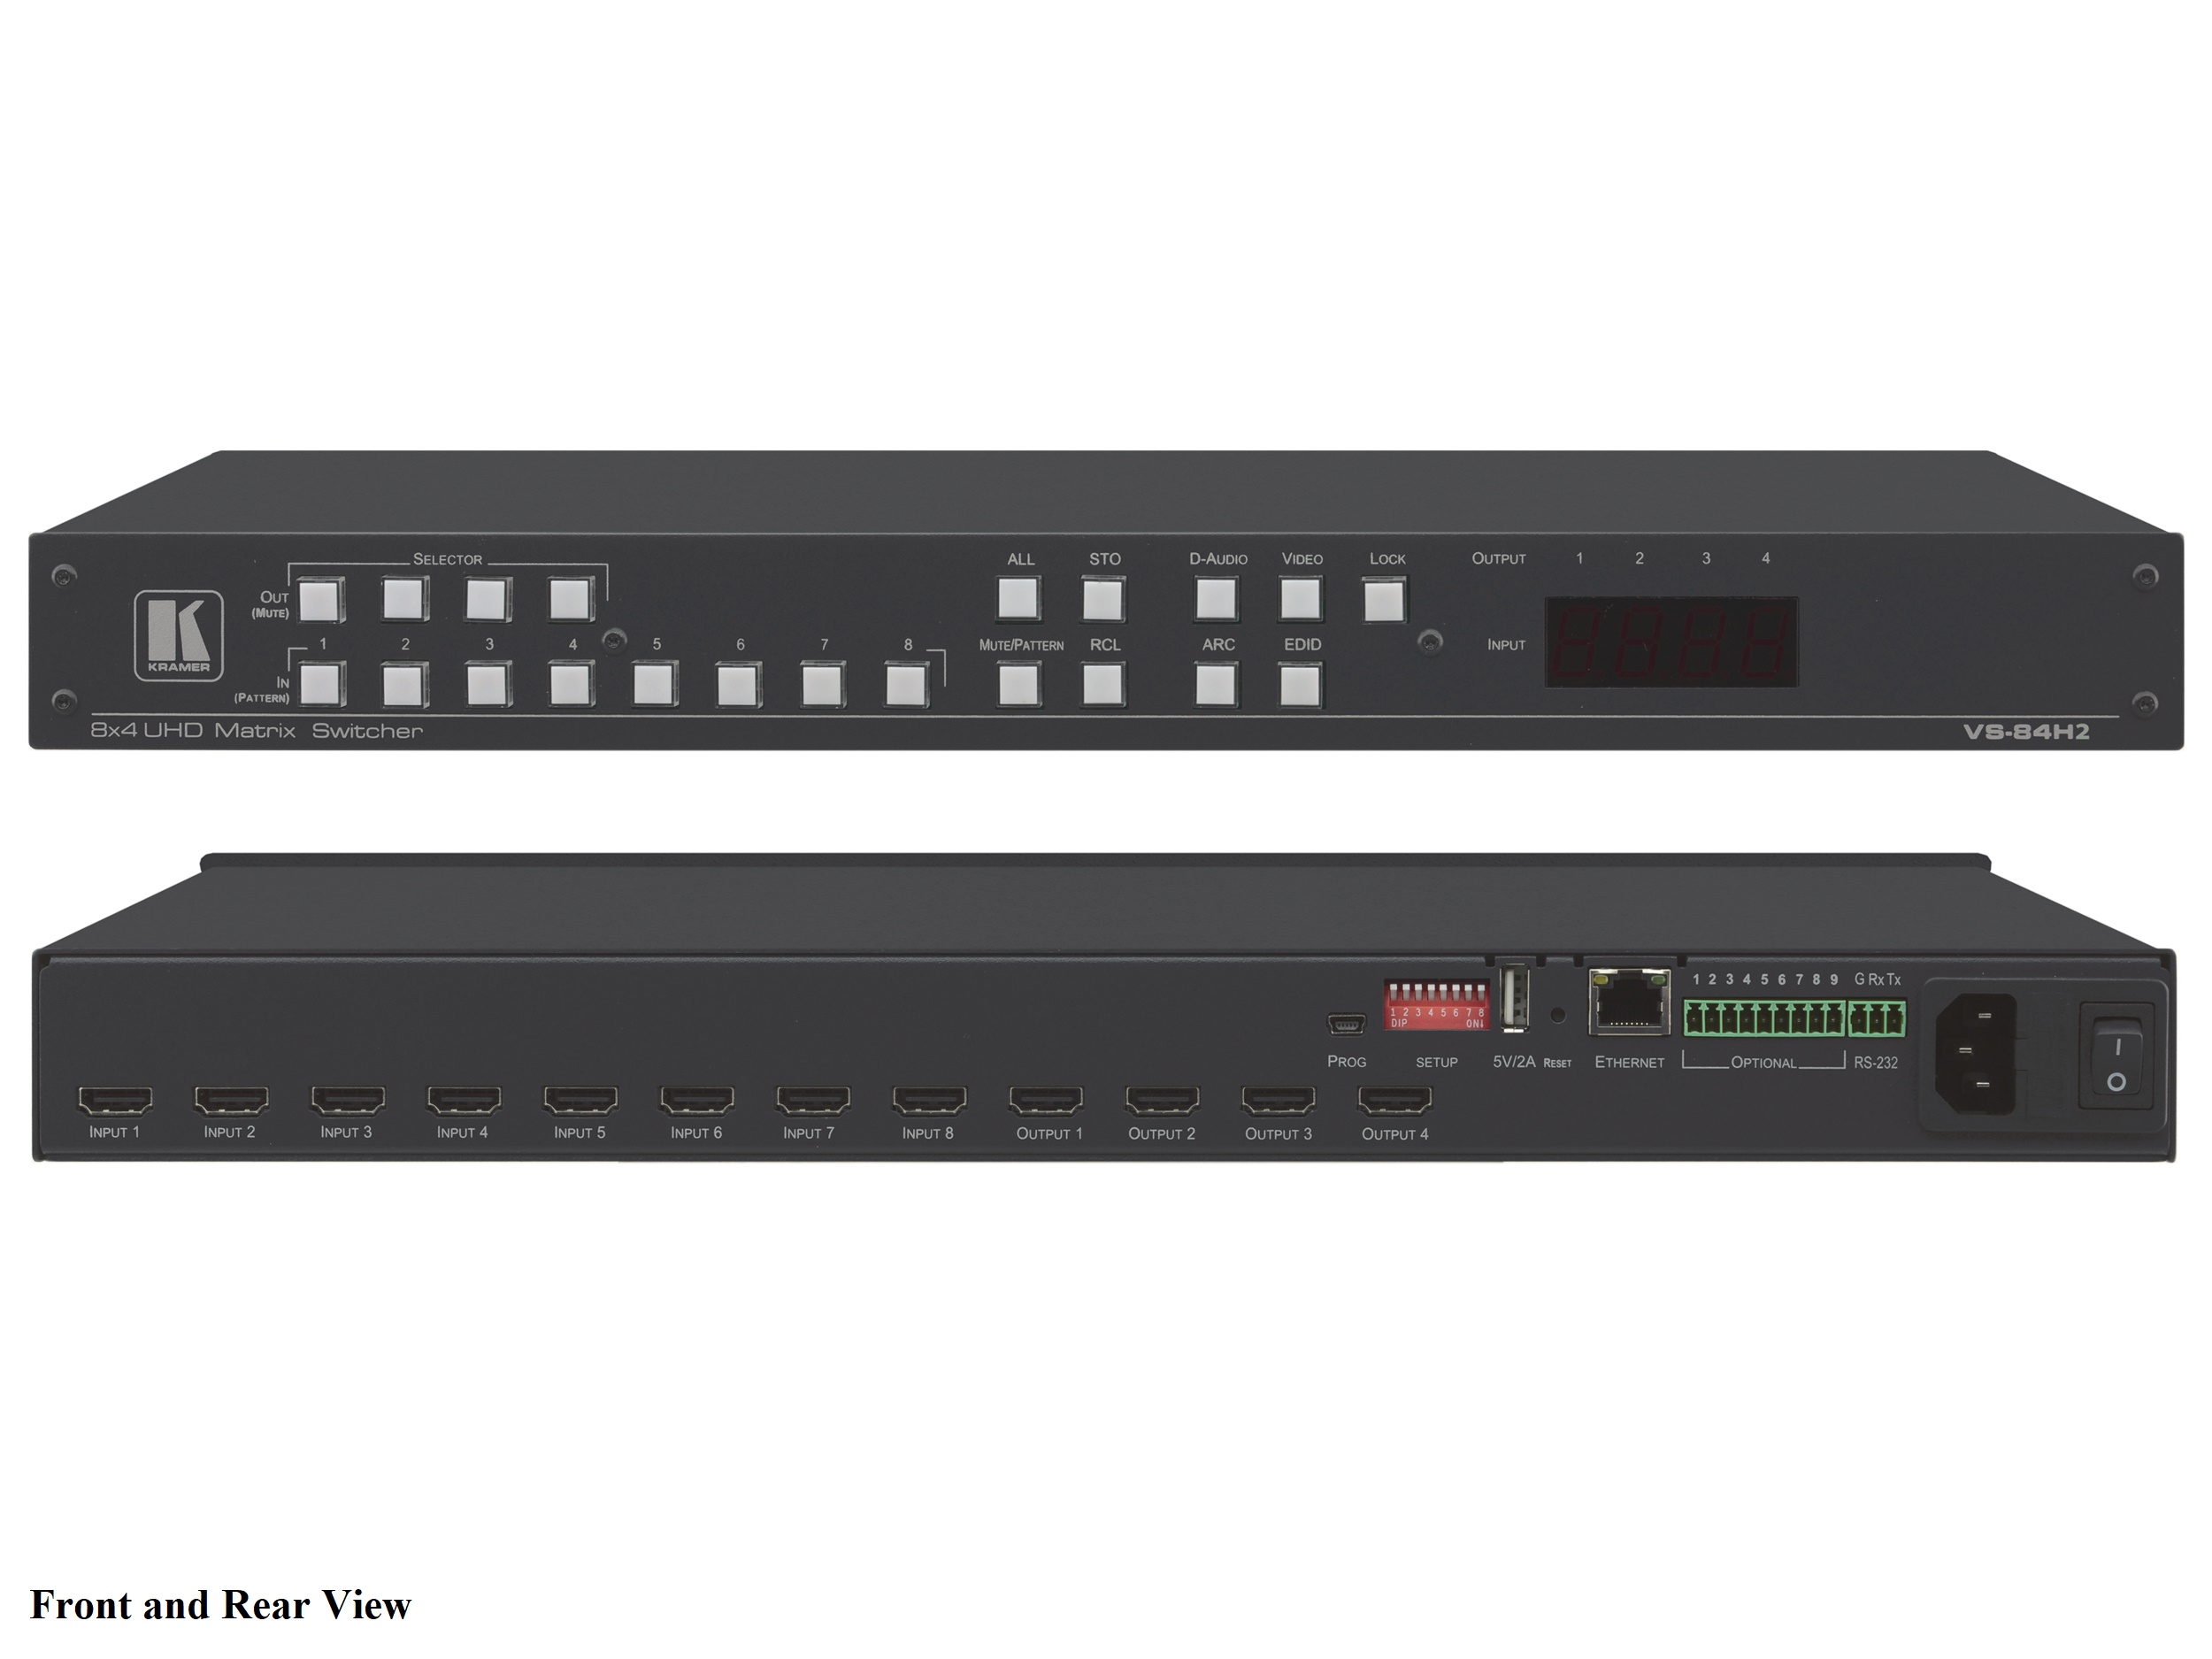 VS-84H2 8x4 4K HDR HDCP 2.2 Matrix Switcher with Digital Audio Routing by Kramer